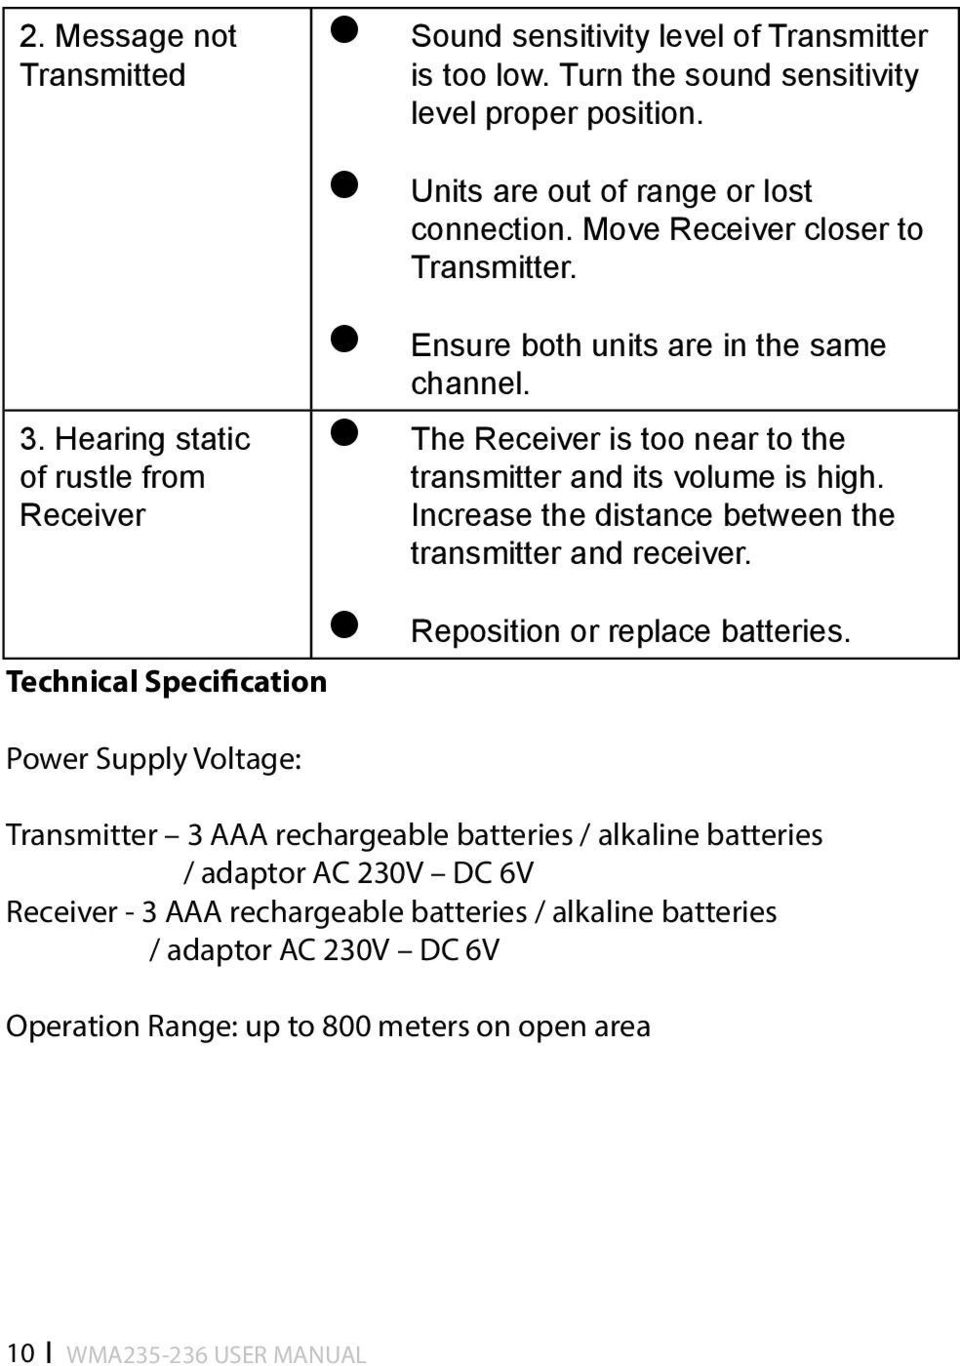 The Receiver is too near to the transmitter and its volume is high. Increase the distance between the transmitter and receiver. Reposition or replace batteries.